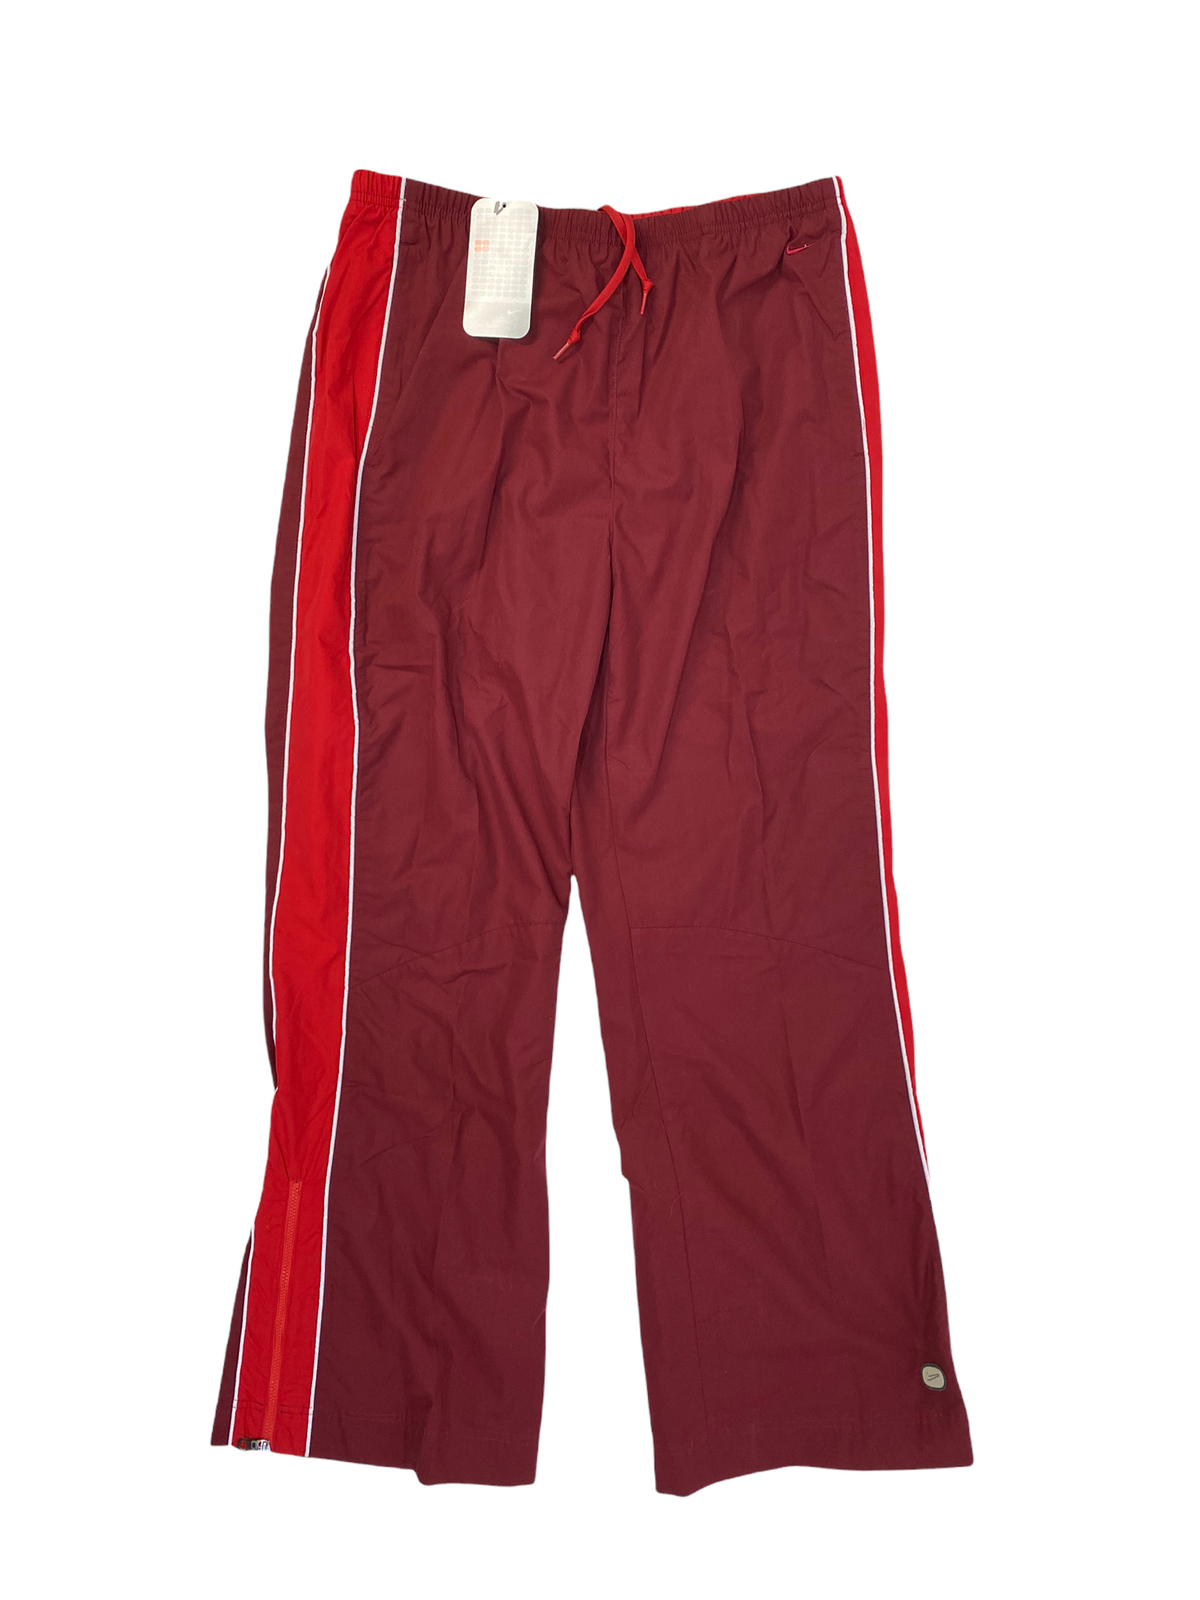 VINTAGE NIKE 2003 WOMEN RED TRACK PANTS IN RED - Not In Your Wardrobe™ - [Vendor]